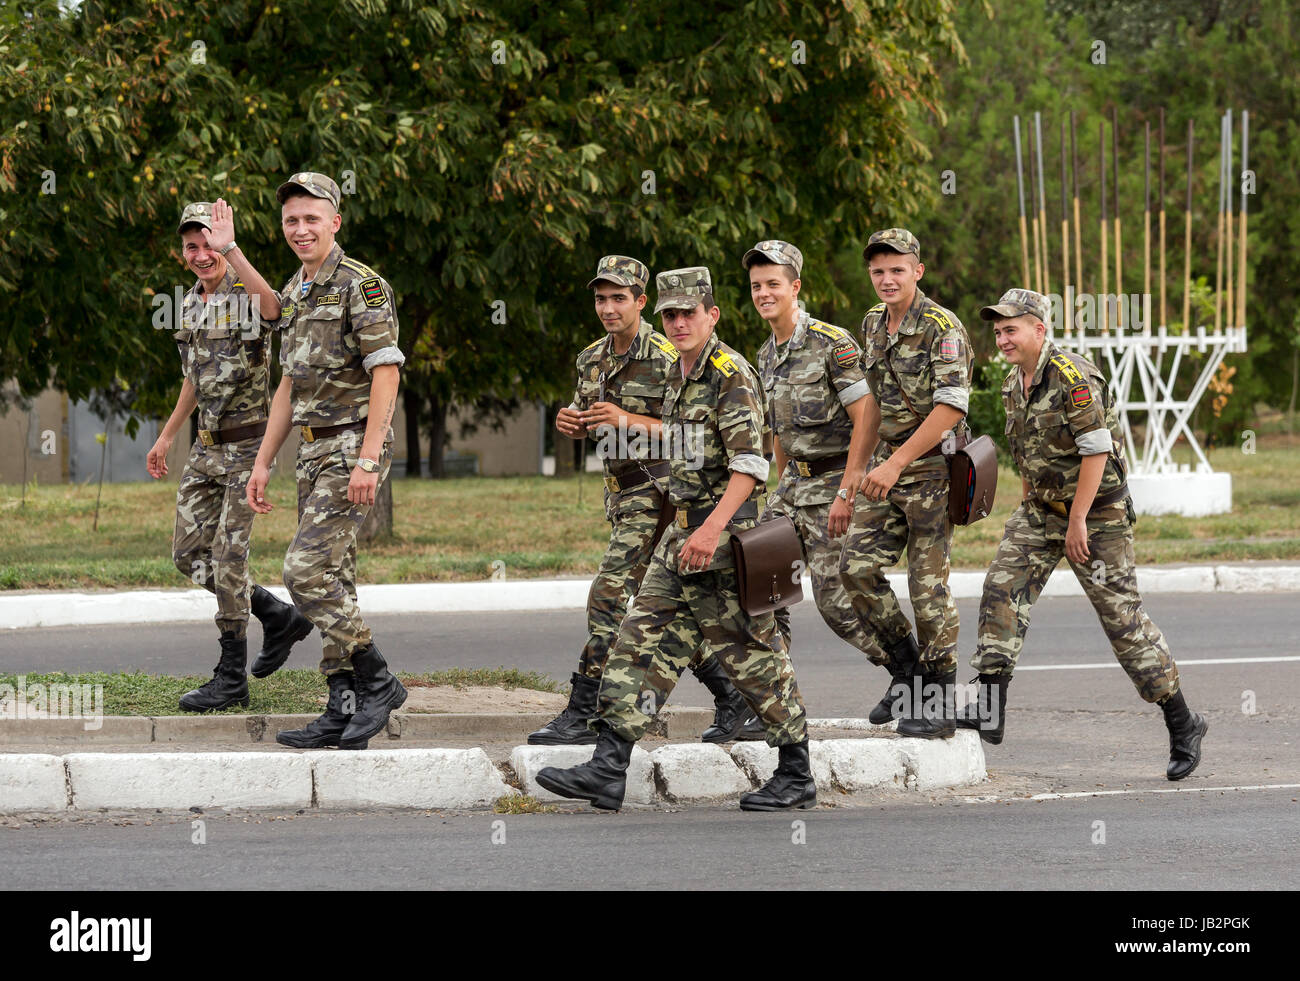 Bender, Moldova, soldiers on the road Stock Photo